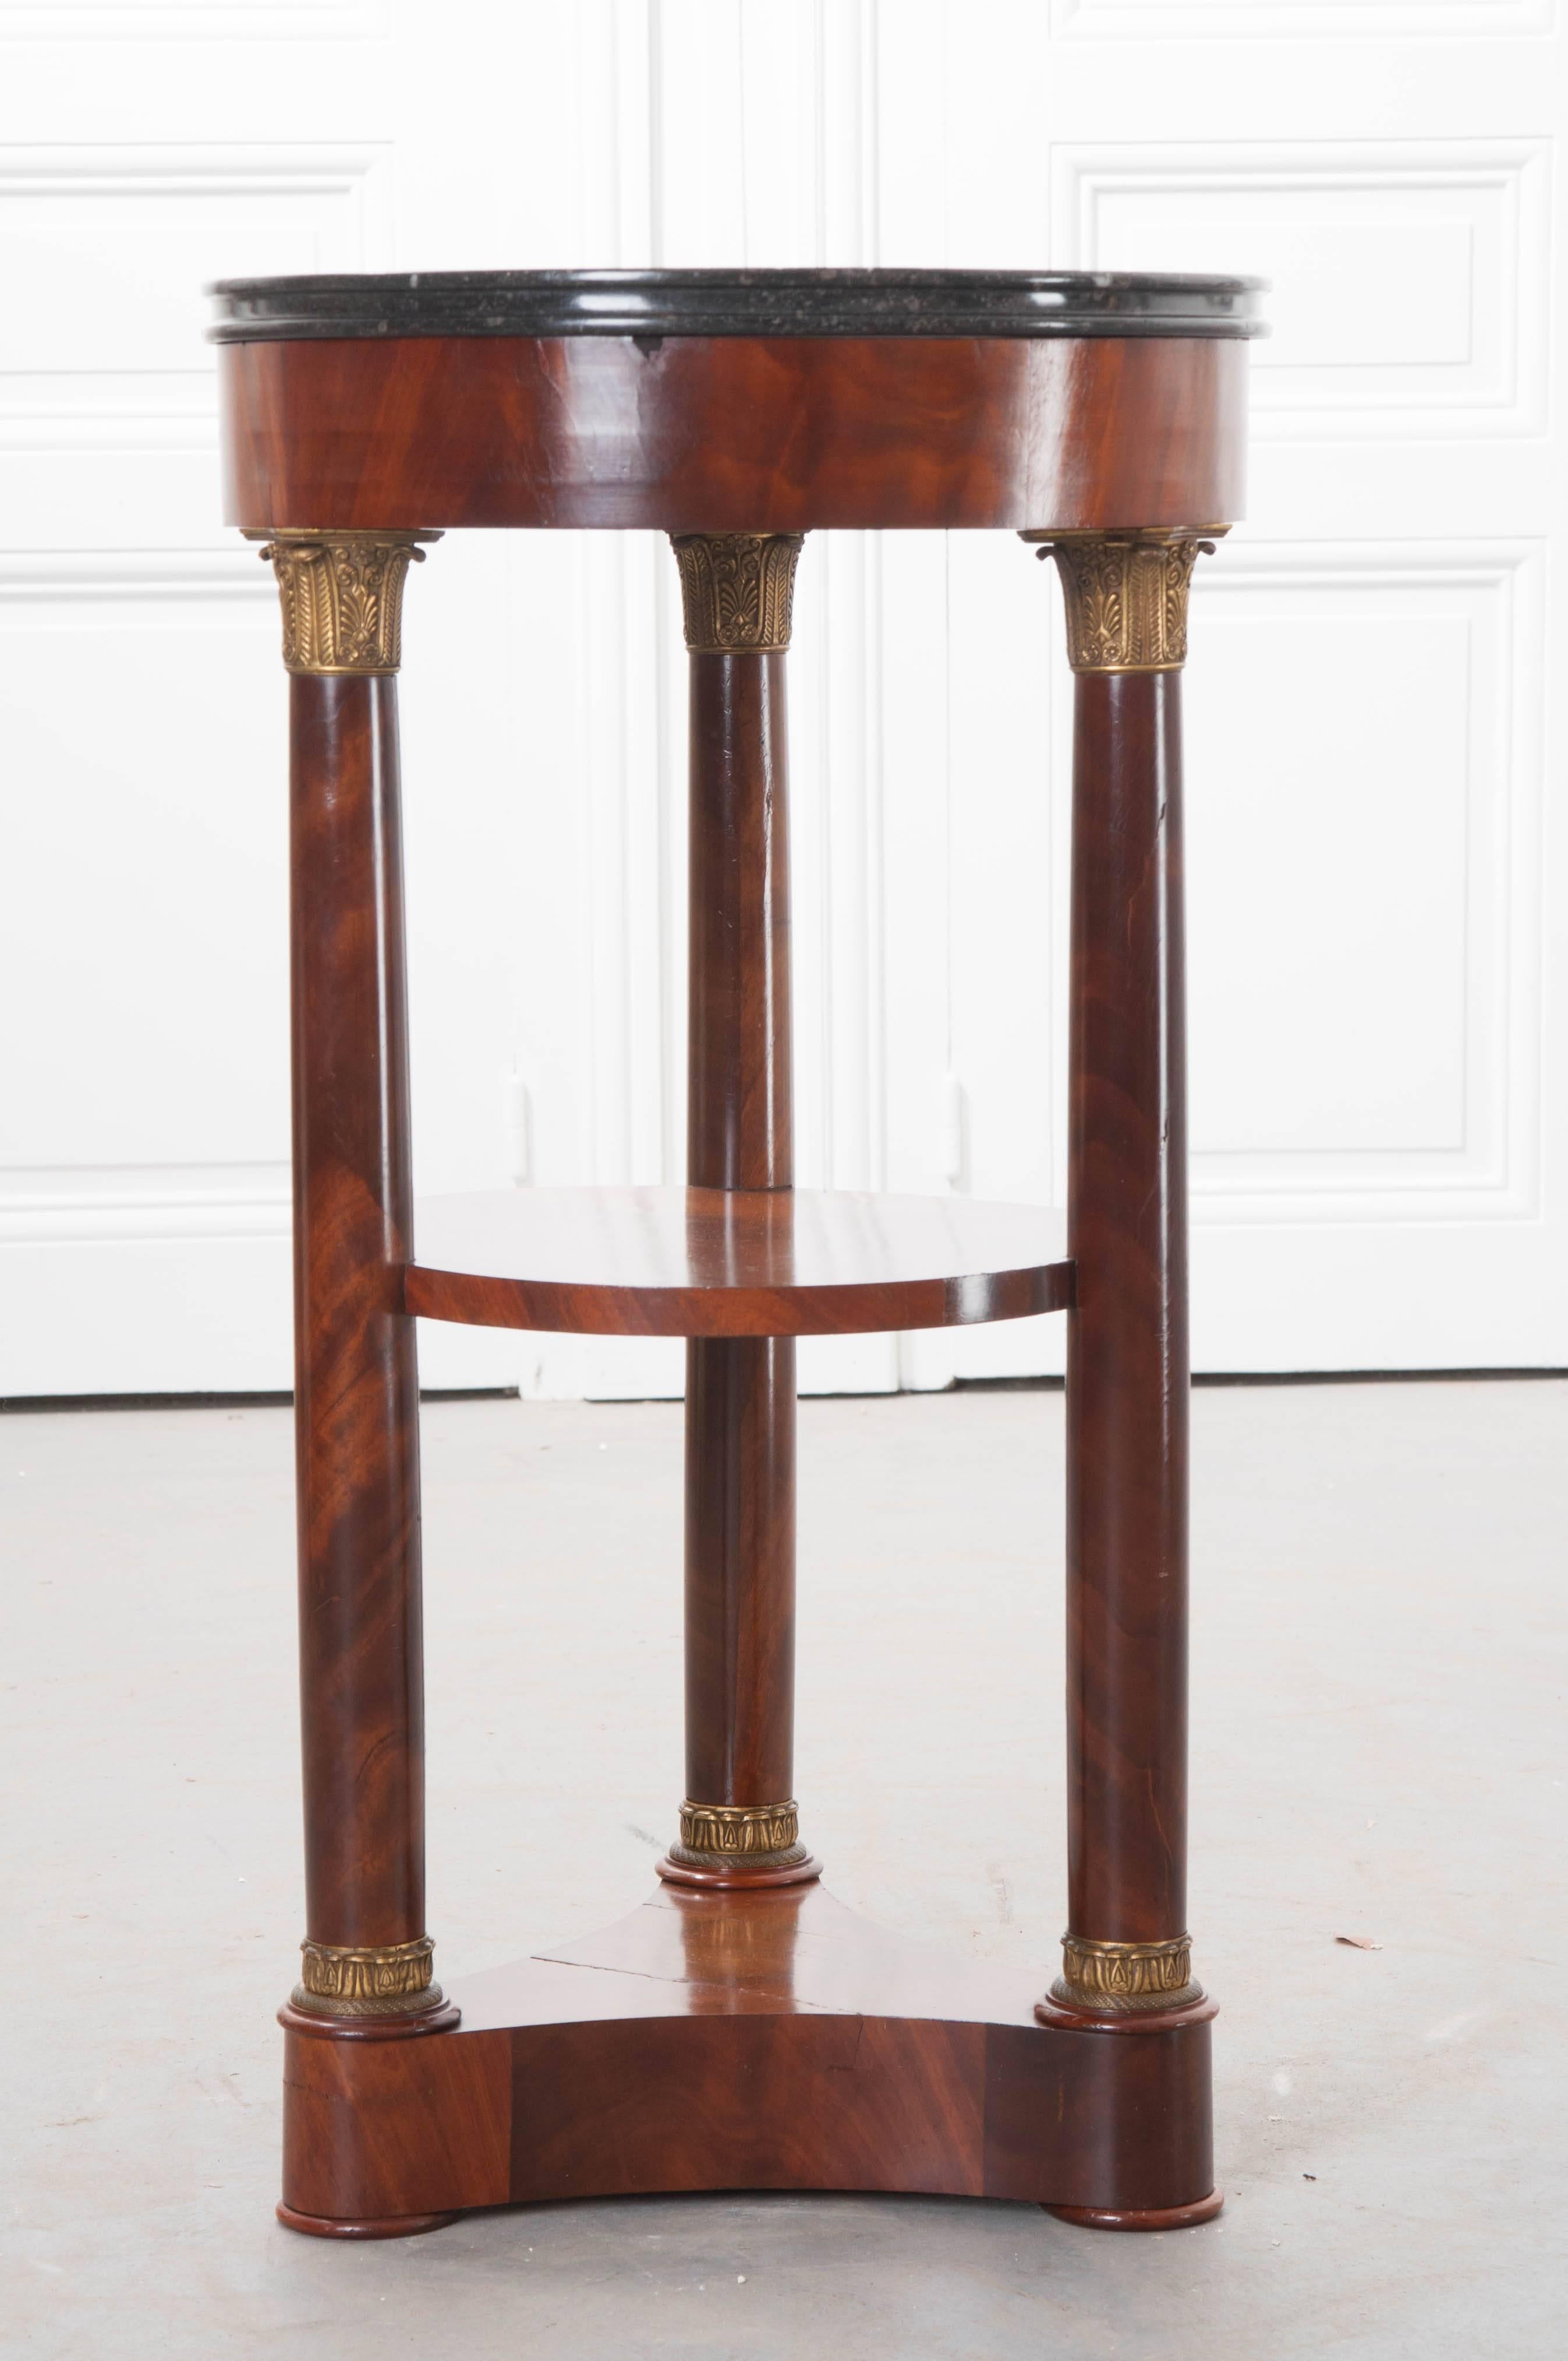 A remarkable round, mahogany table with marble top, from the Empire period, France. This wonderful table has a round, black, fossil marble top. This marble top has a finished edge and is in excellent condition. The table has three legs, all with